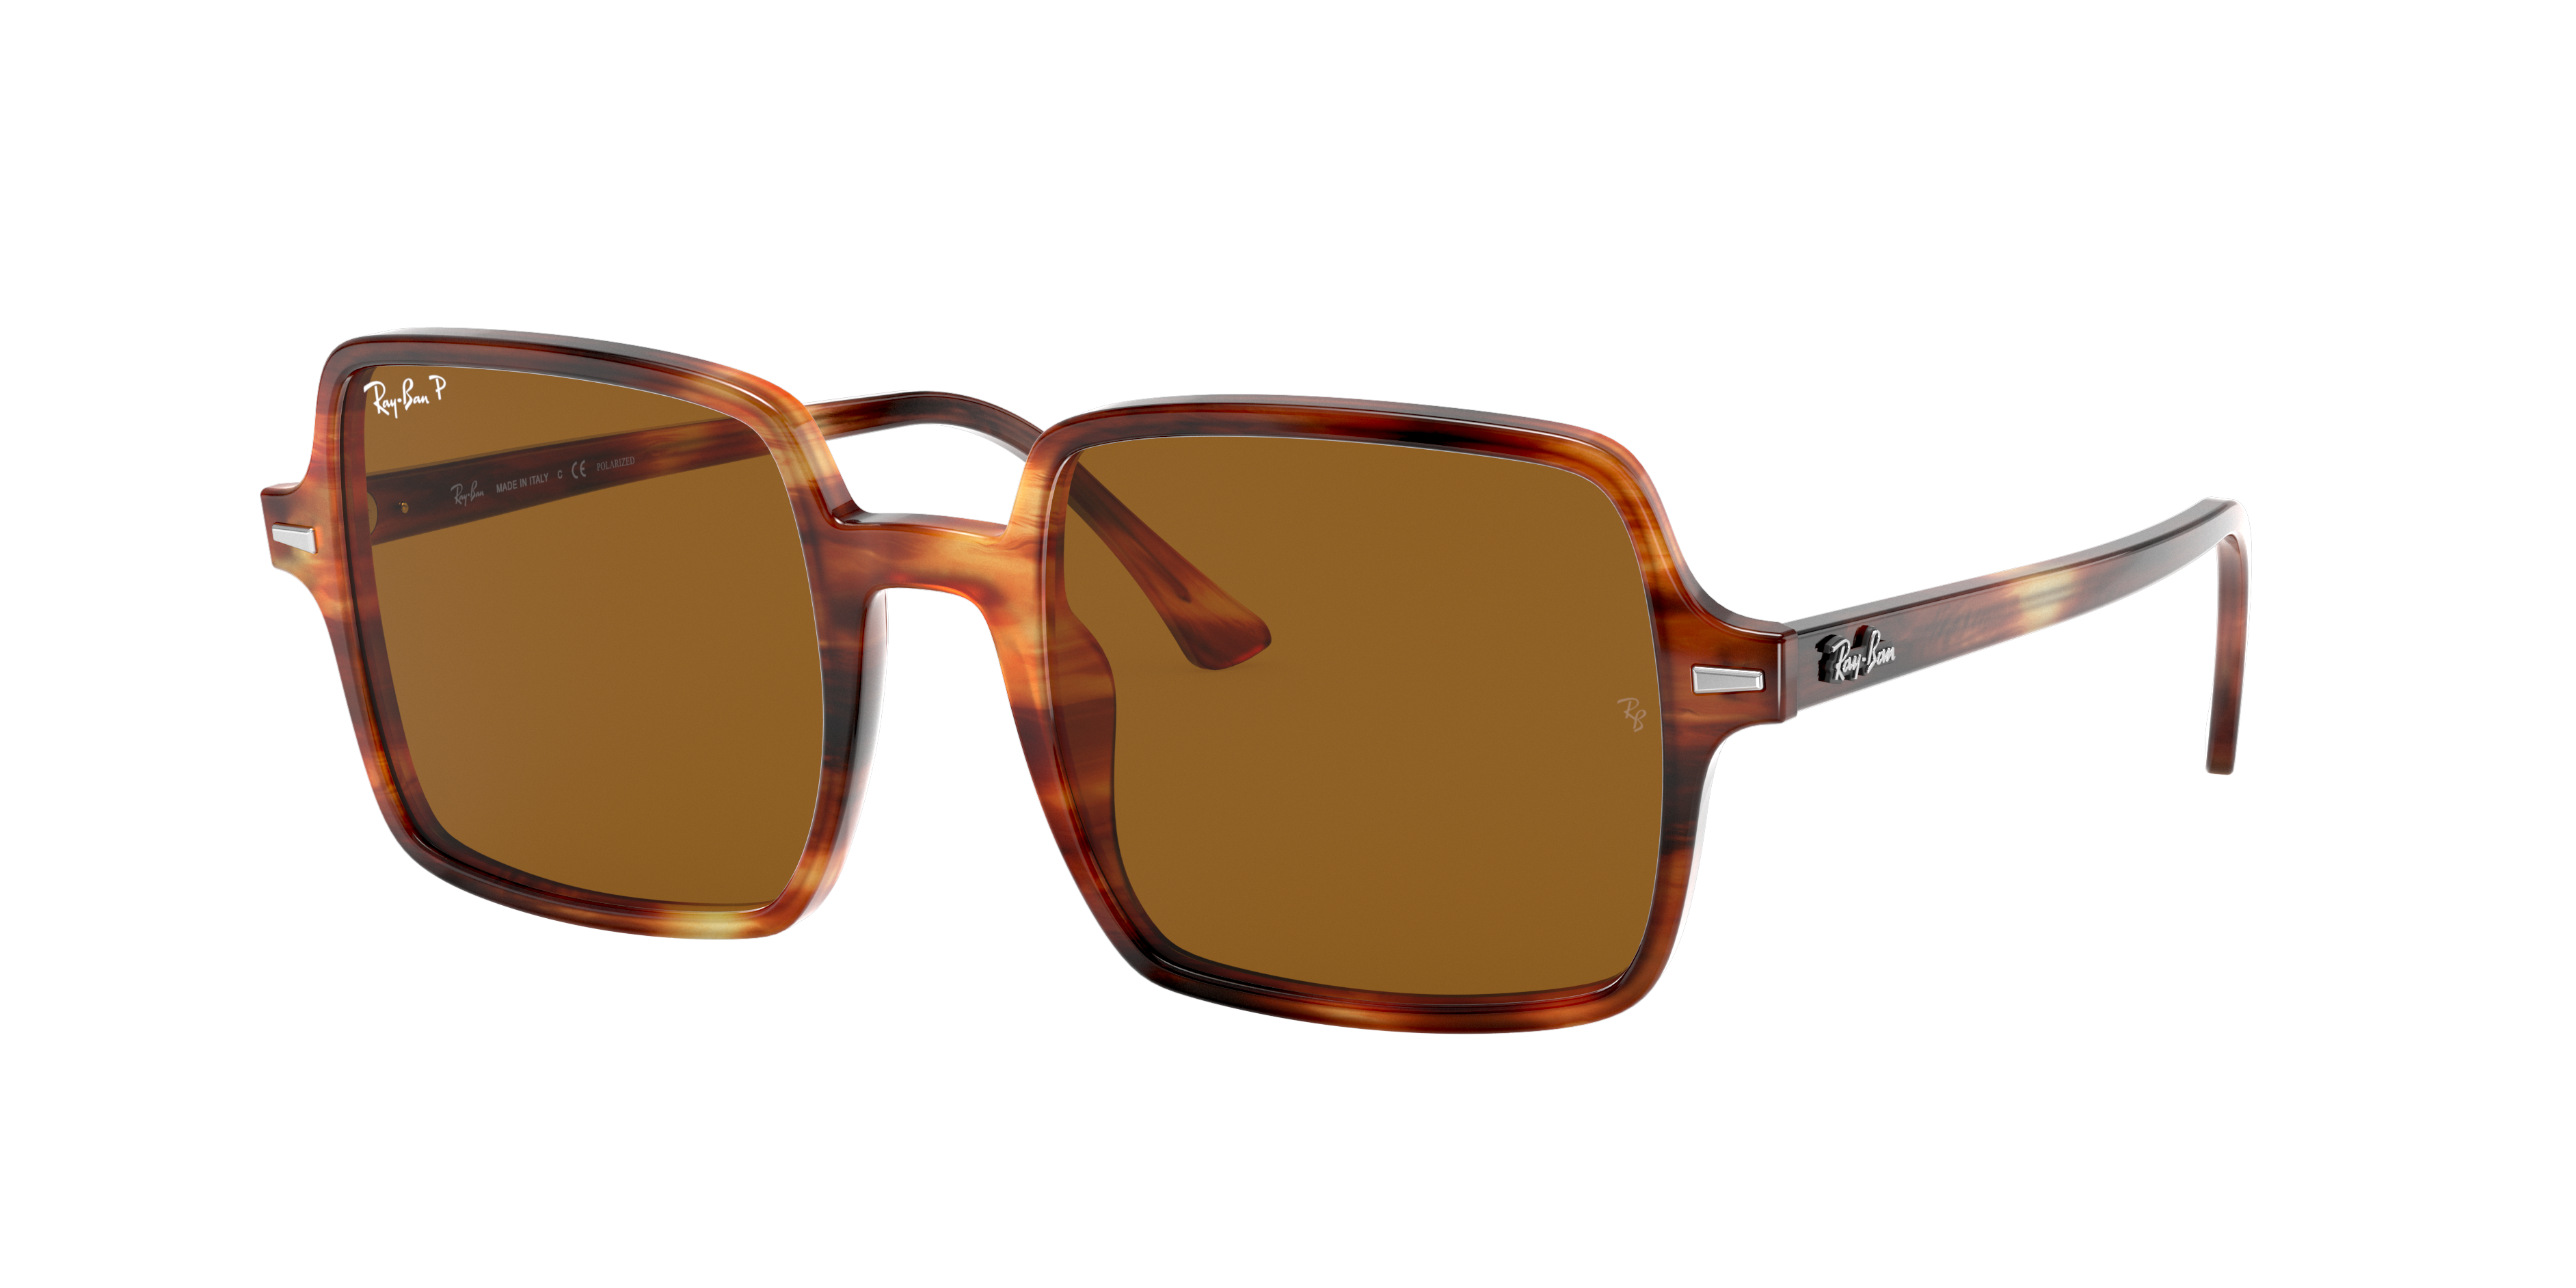 Brown square sunglasses with tortoise frame. Available at Ray-Ban. Summer honeymoon must-haves.